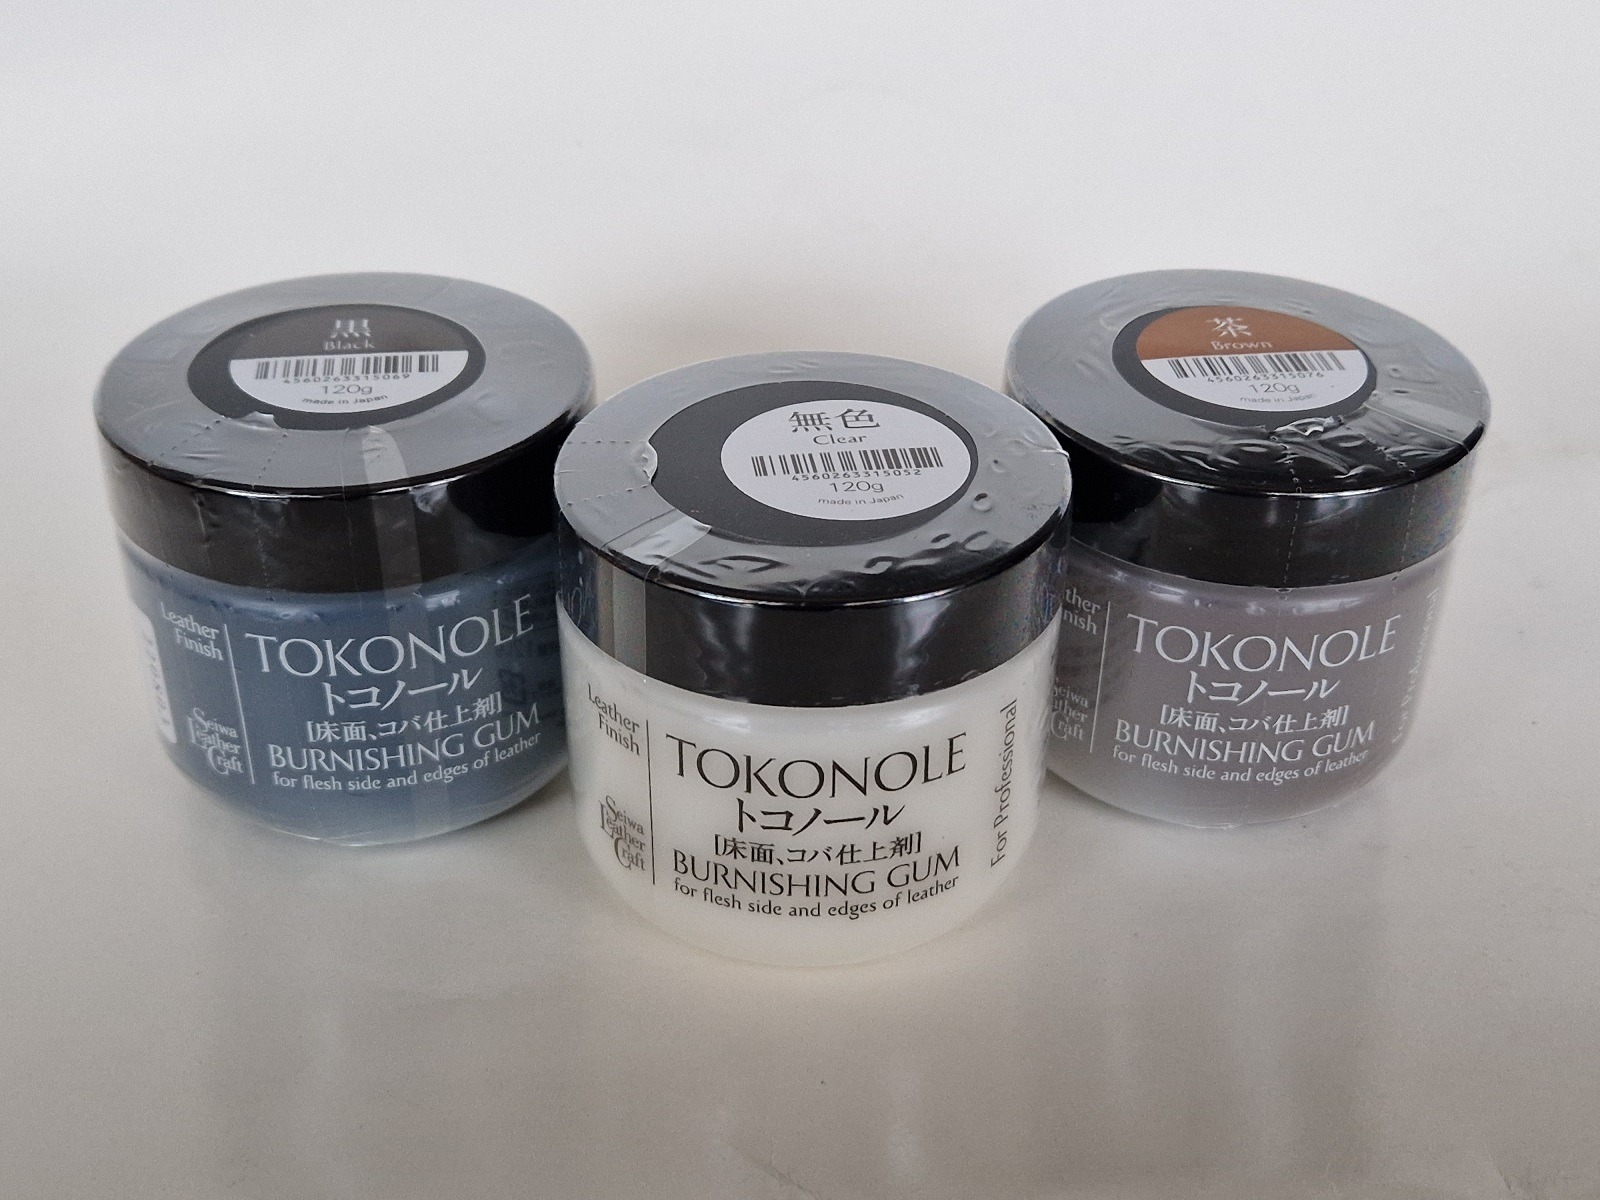 Tokonole Gum 120 - Natural leather, Fittings, Paints for skin